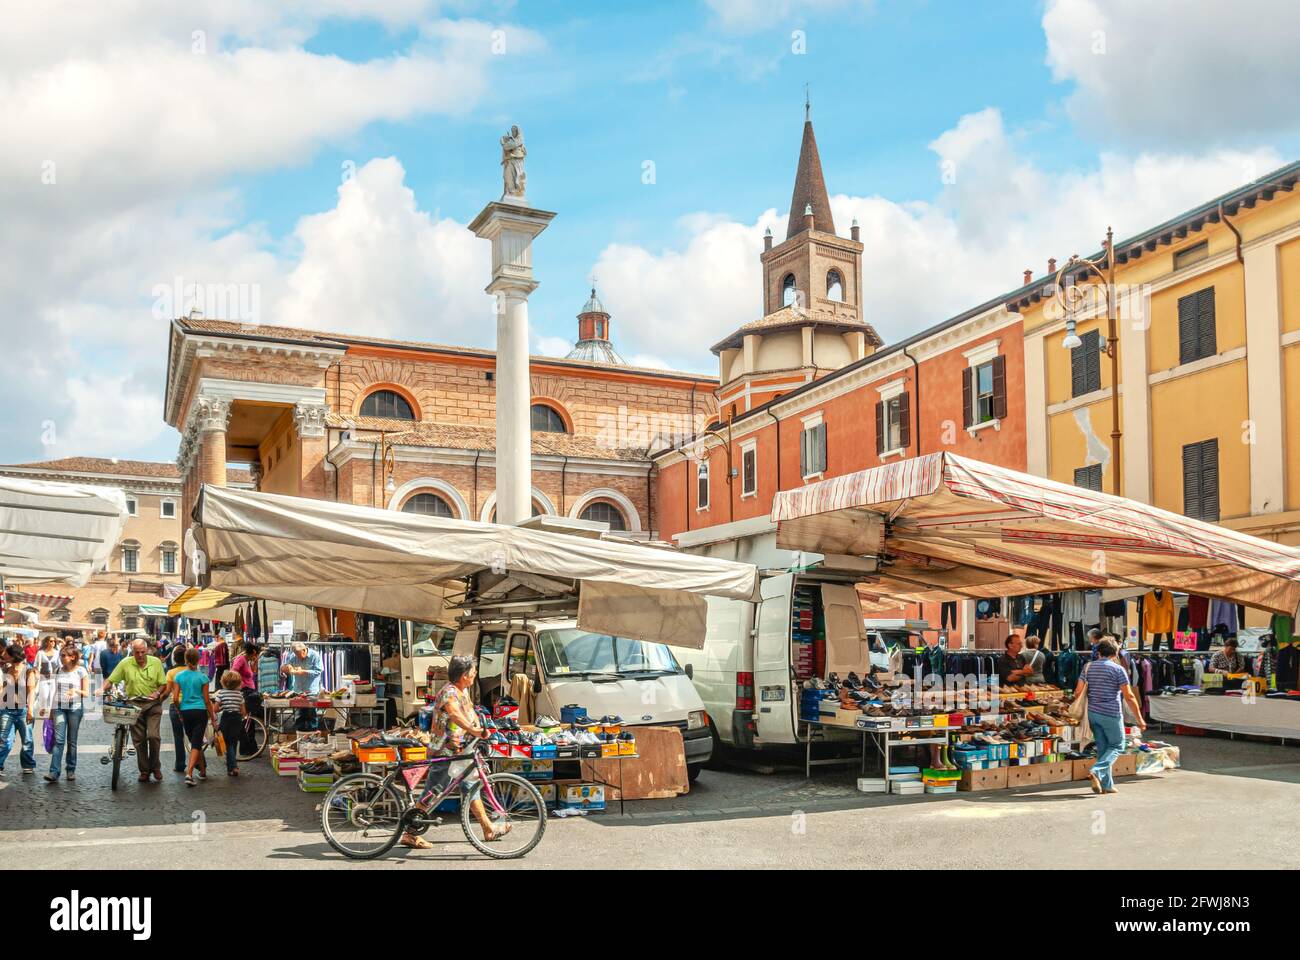 Busy Market Place in the town centre of Forli, Emilia Romagna, Italy. Stock Photo